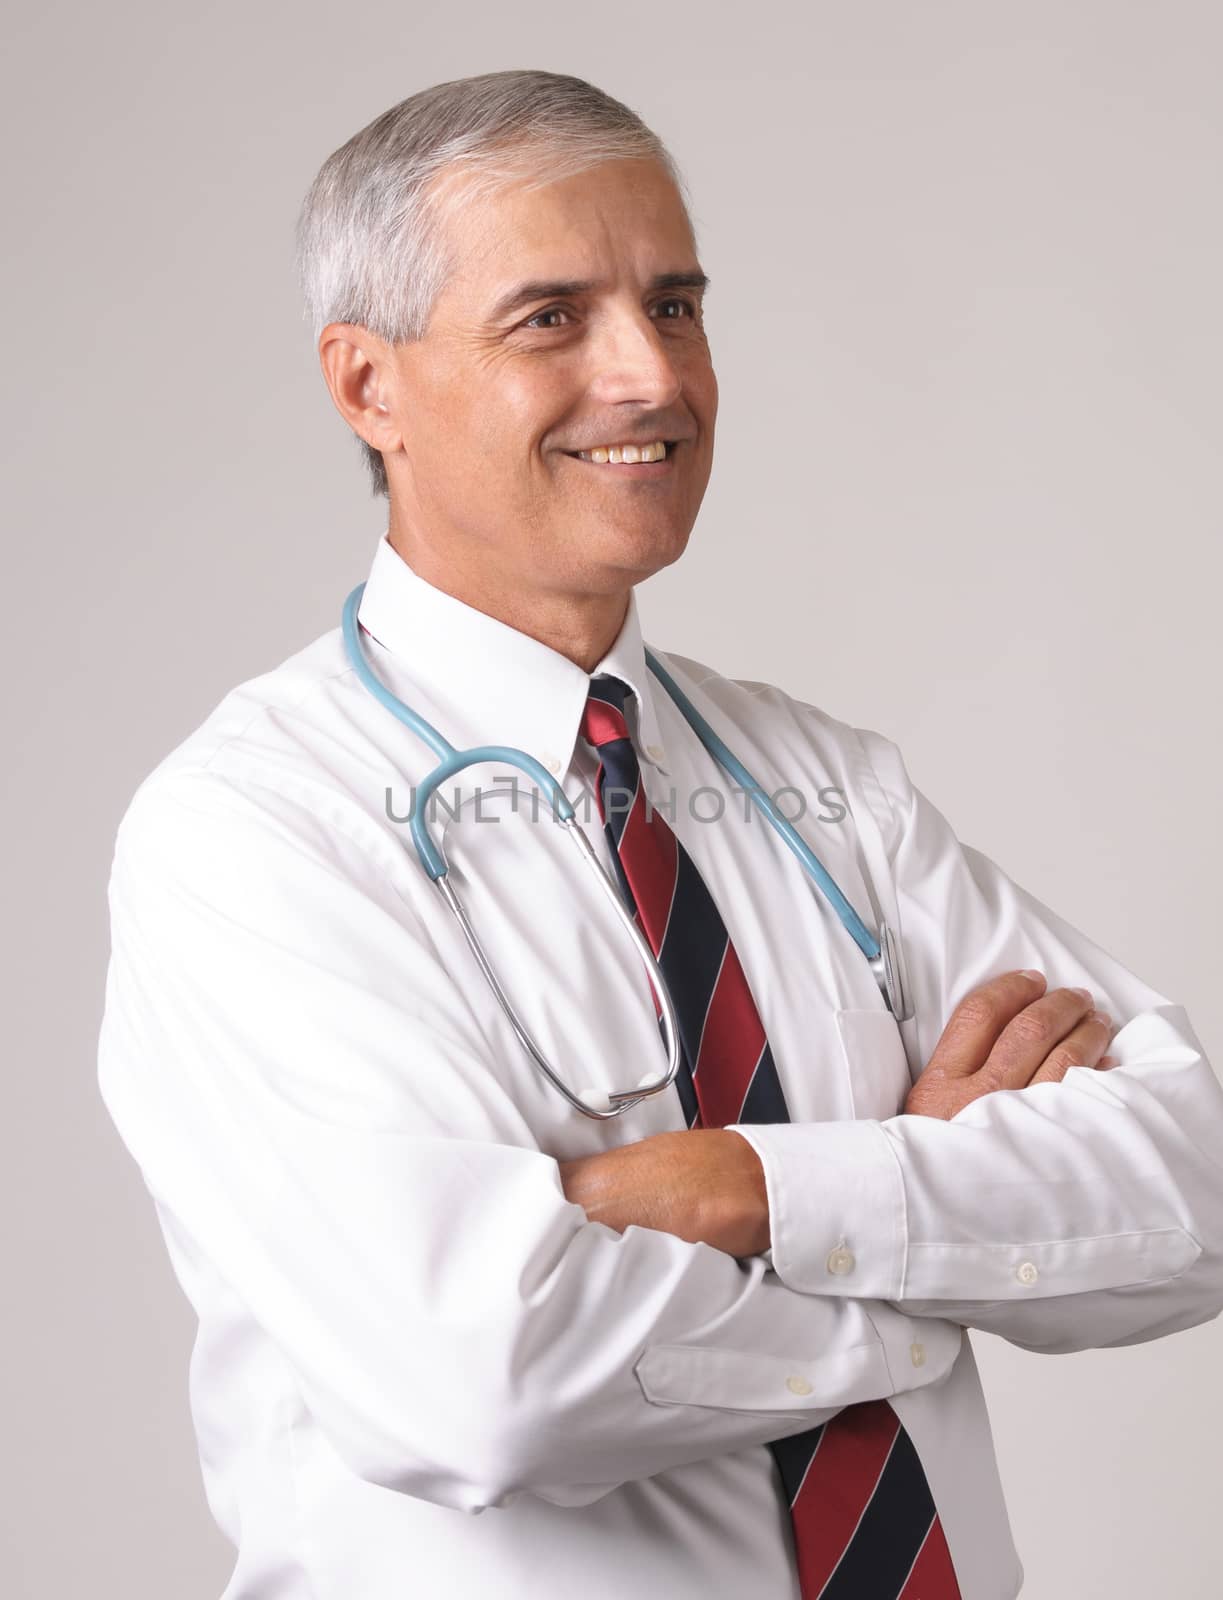 Profile Portrait of Smiling Middle Aged  Doctor with Stethoscope and arms crossed